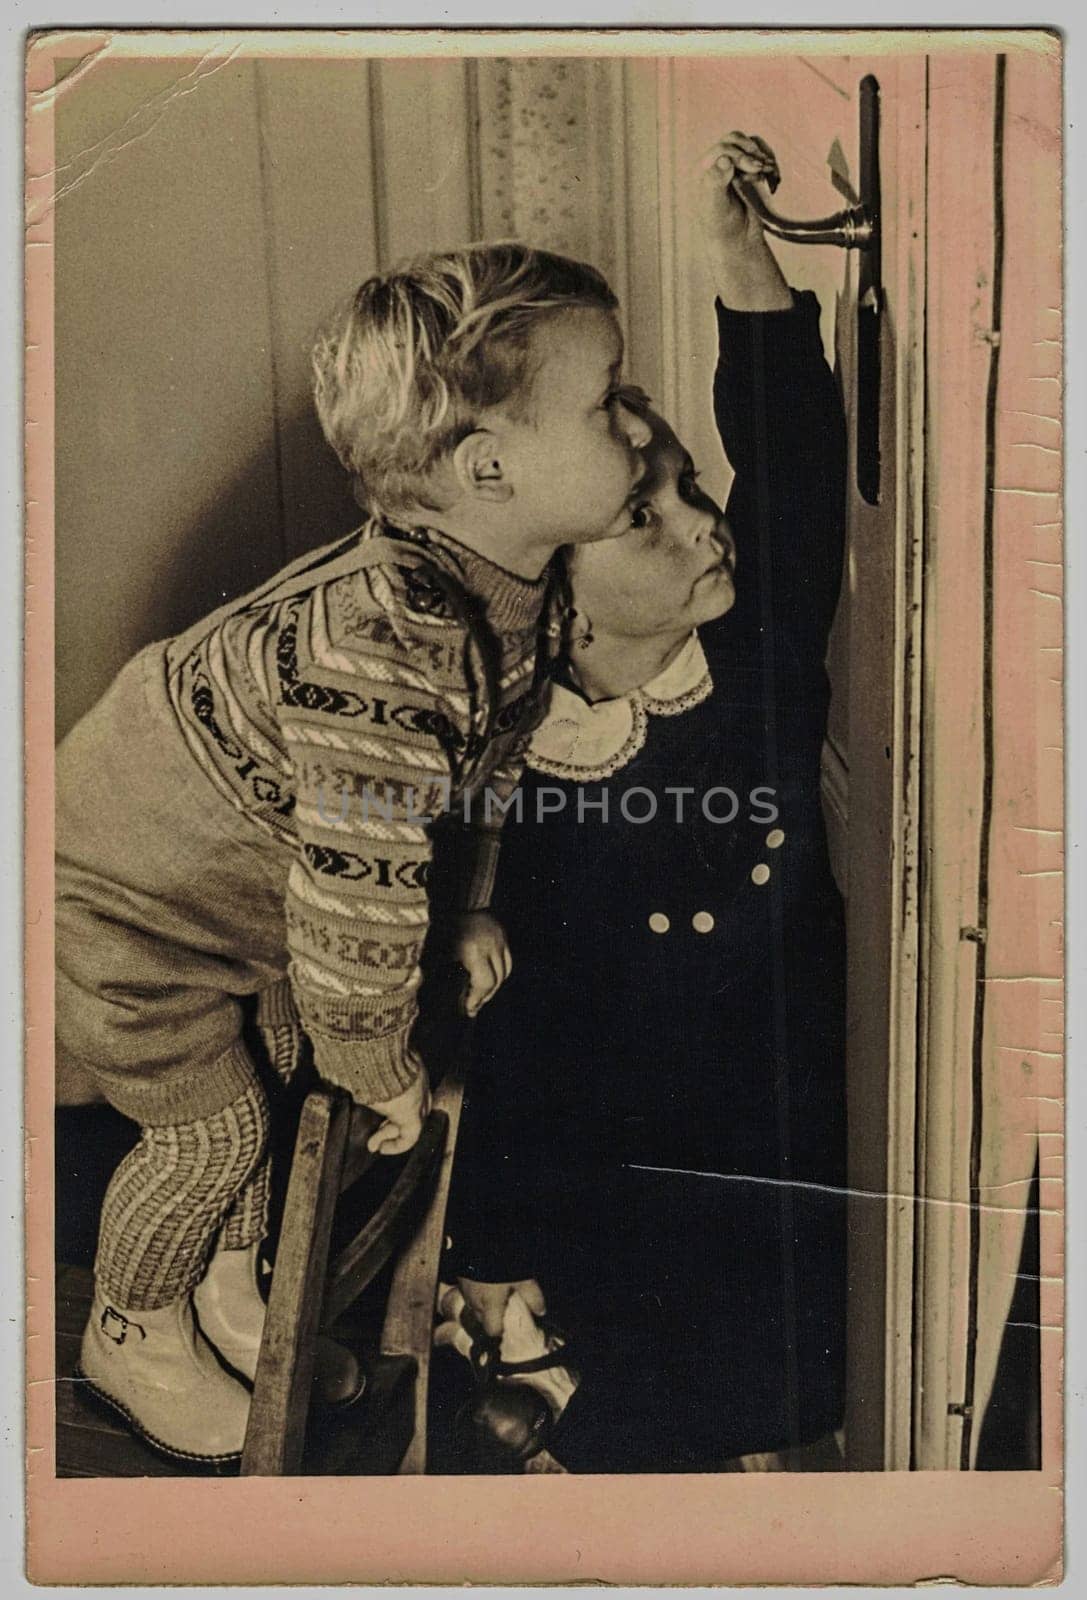 GERMANY - CIRCA 1960s: The vintage photo shows two children-boy and girl curiously looking for something... Christmas presents, birthday presents, something interesting in the television...